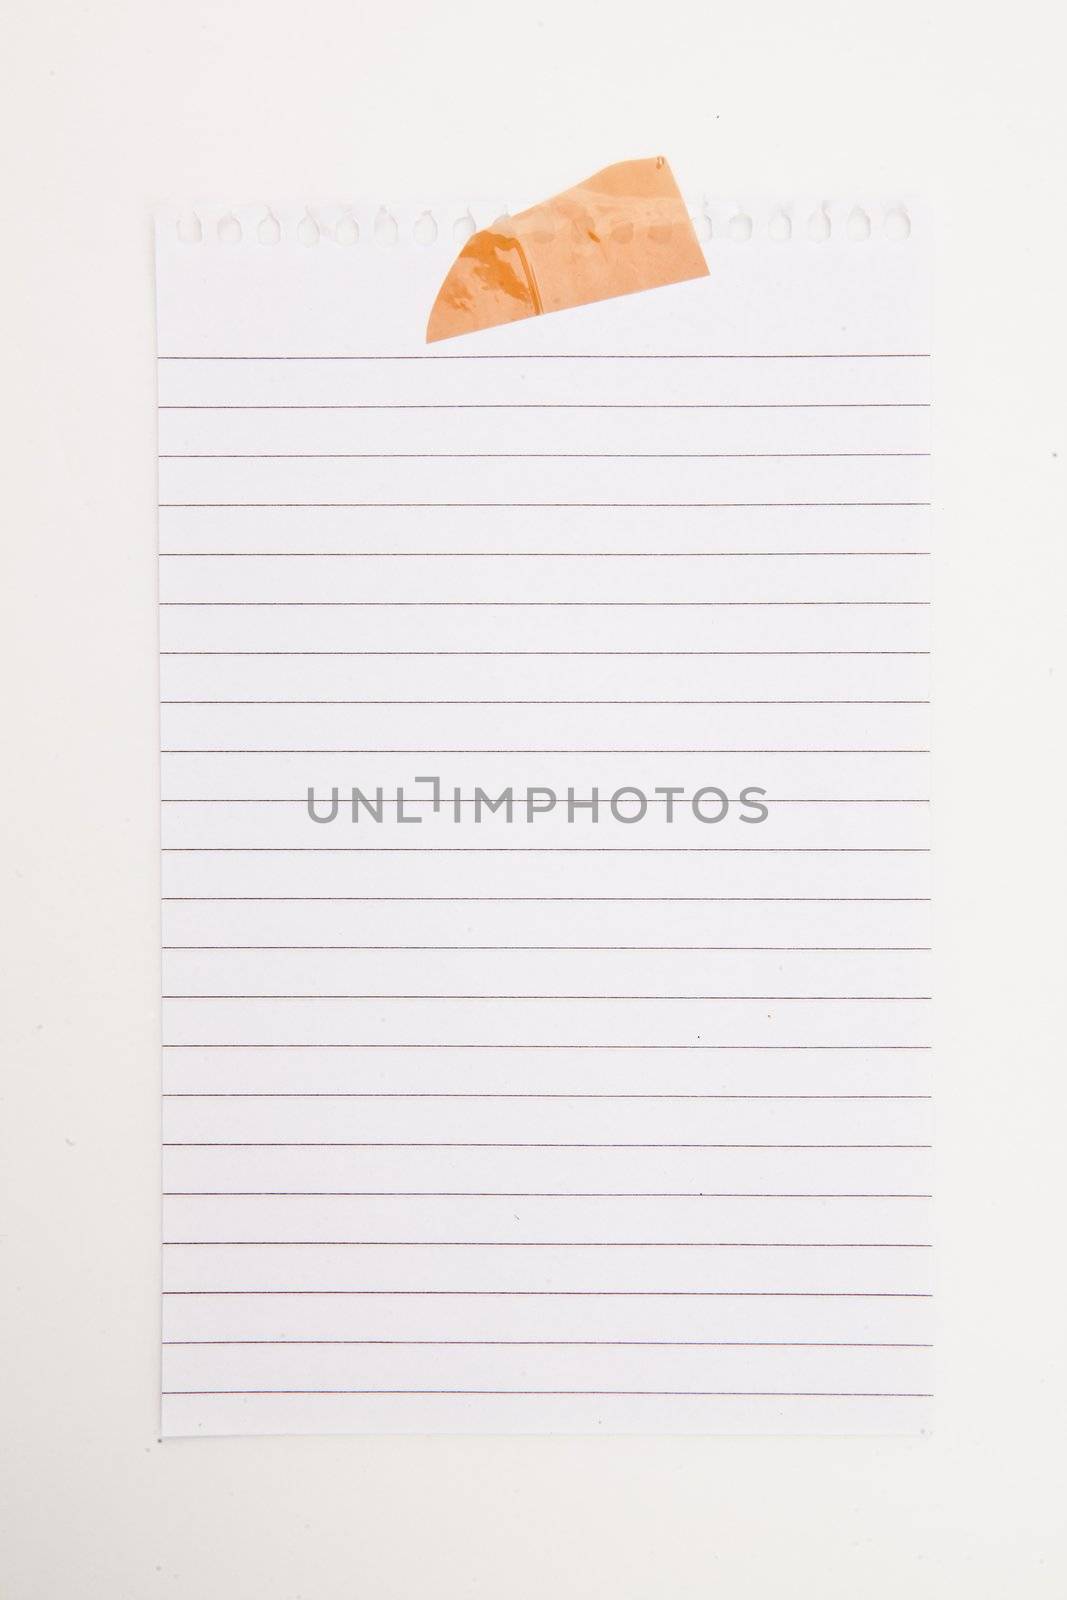 Paper blank with adhesive tape against a white background